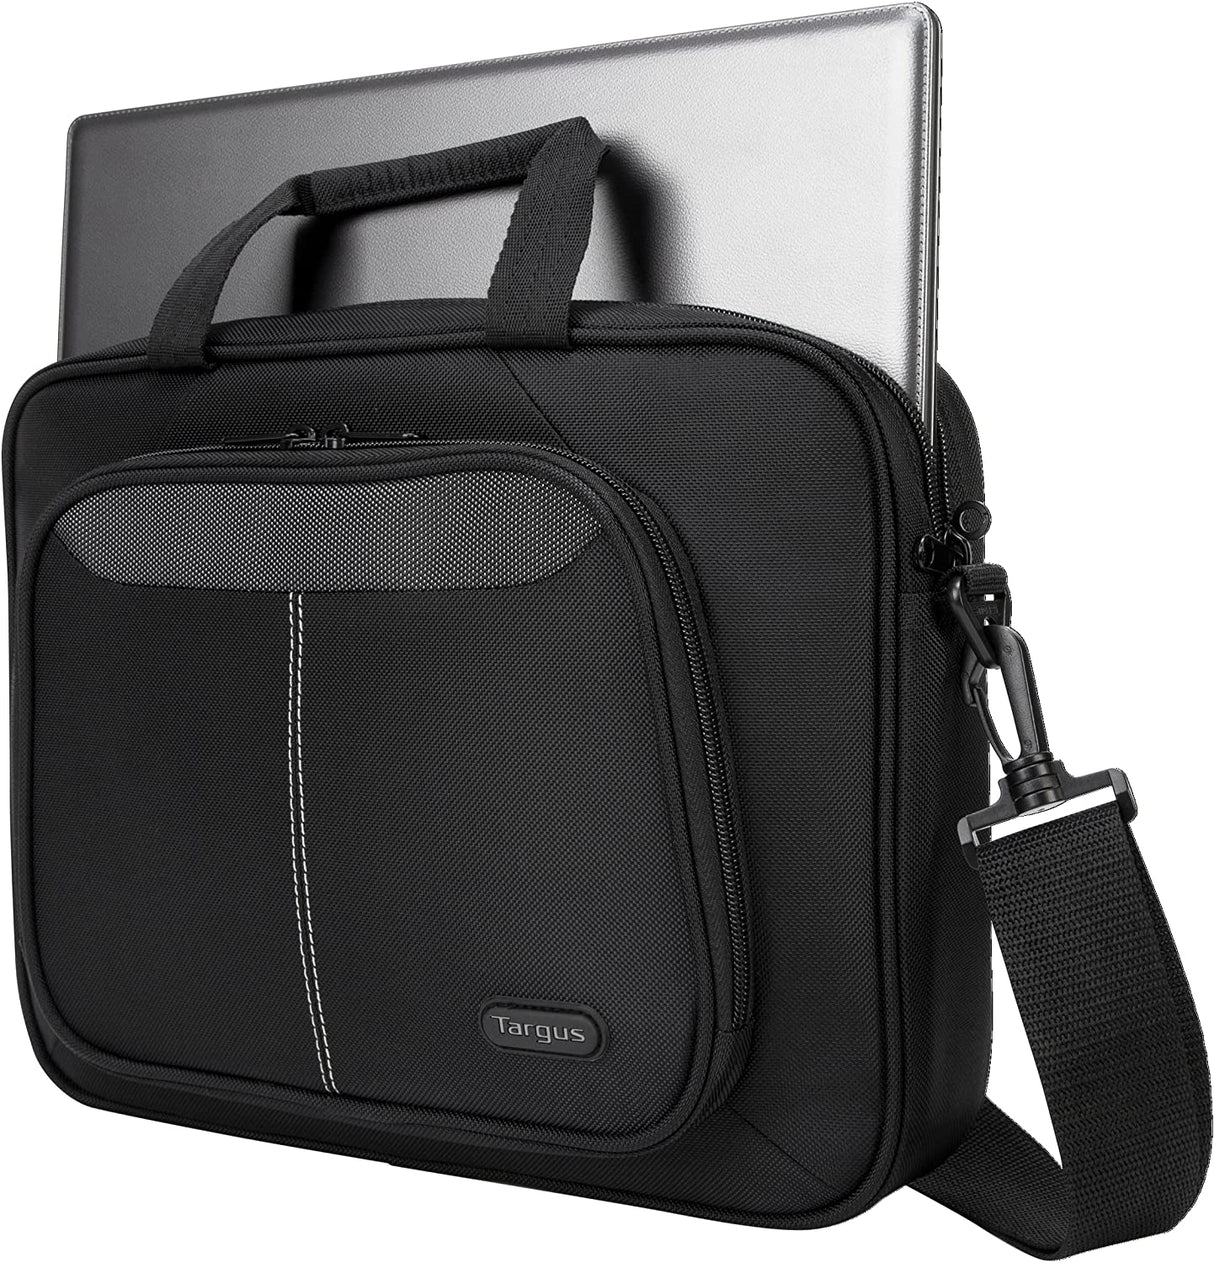 Targus Intellect Slim Slipcase Bag with Durable Water-Resistant Nylon, Two Large Exterior Pockets, Removable Shoulder Strap, Protective Sleeve for 12.1-Inch Laptop and Tablet, Black (TBT248US) Slim Slipcase 12.1 inch